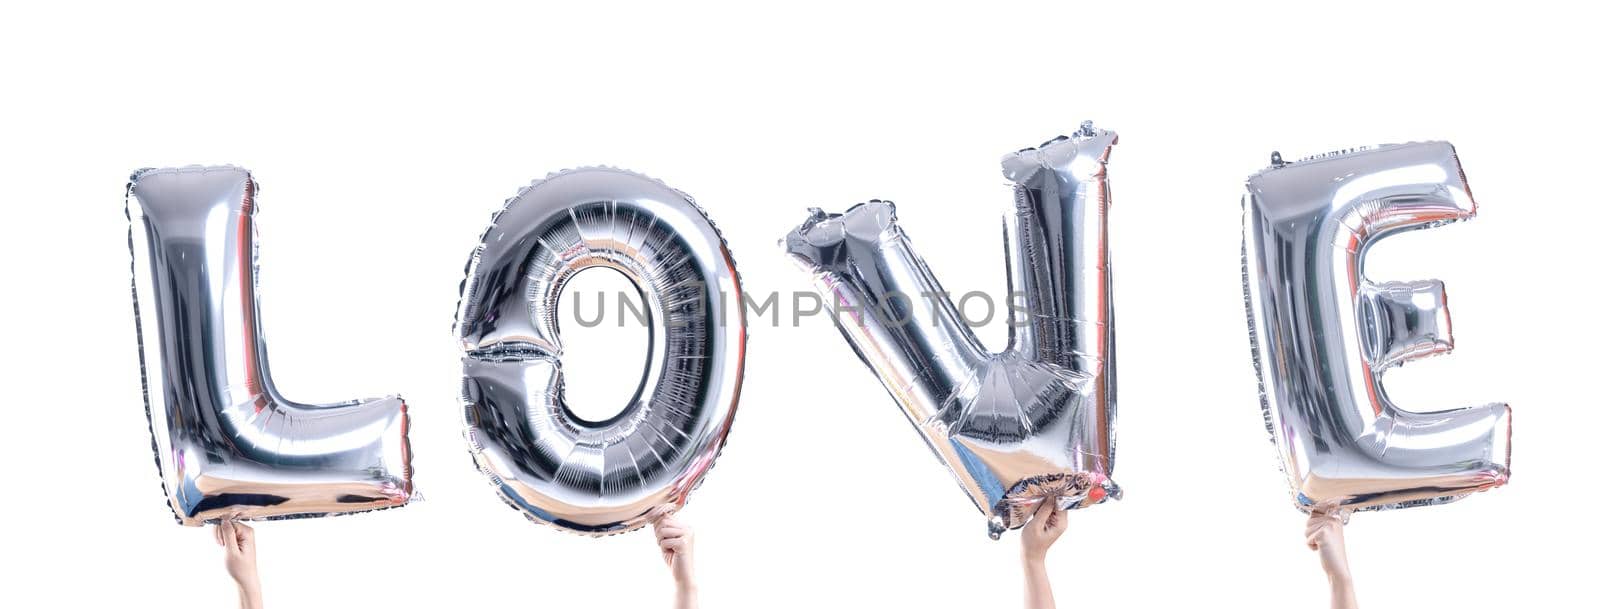 Foil silver color balloons in LOVE word held on woman's hand isolated on white background. by ROMIXIMAGE